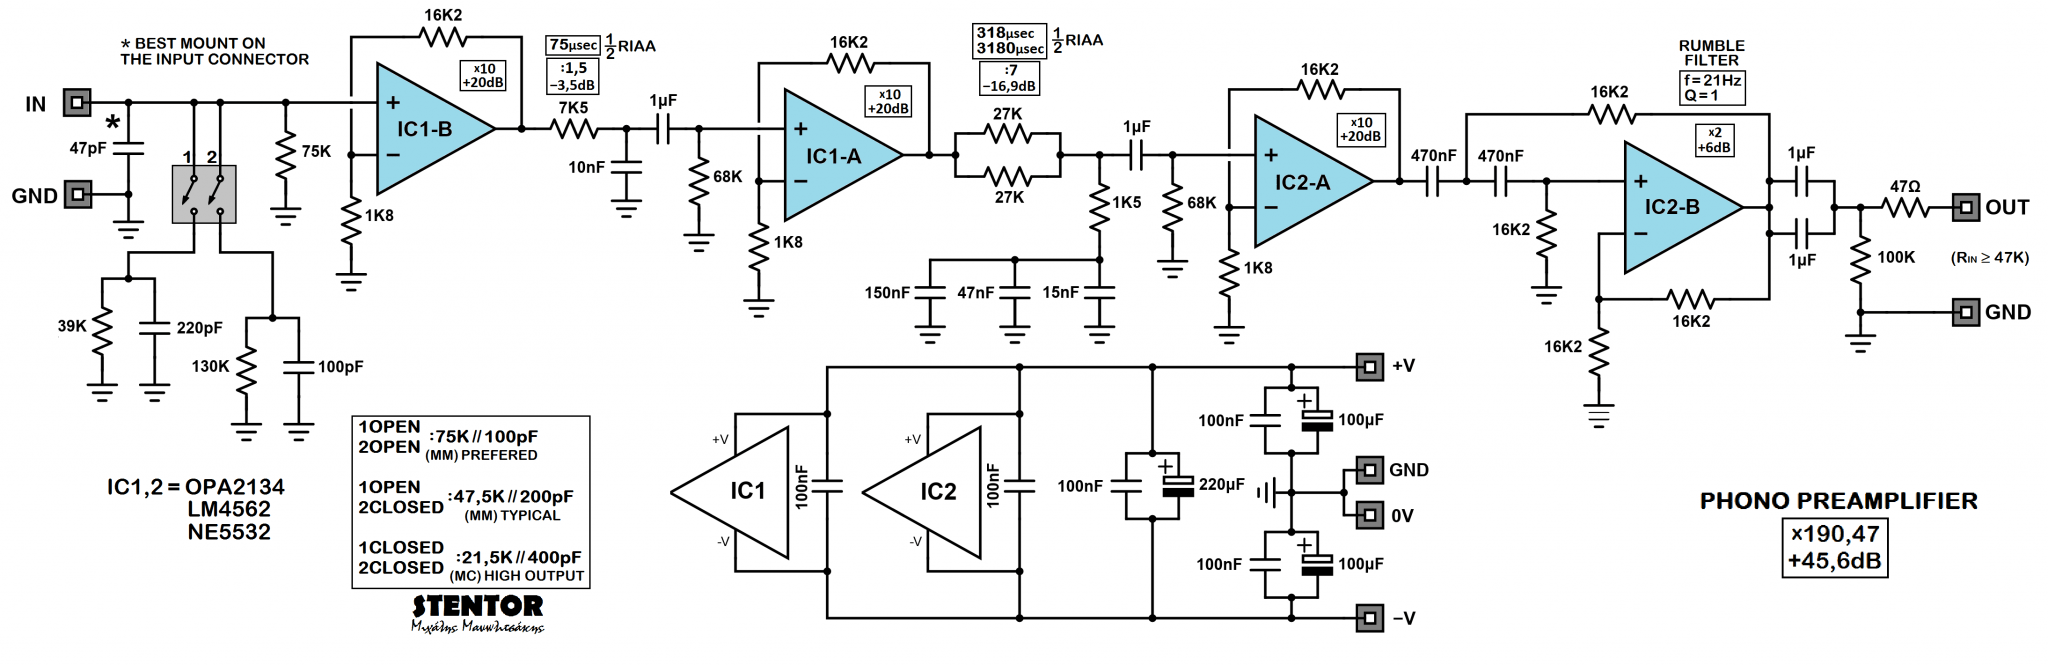 Phono RIAA Preamp Low Noise Transistors Work With Single 12-24Vdc